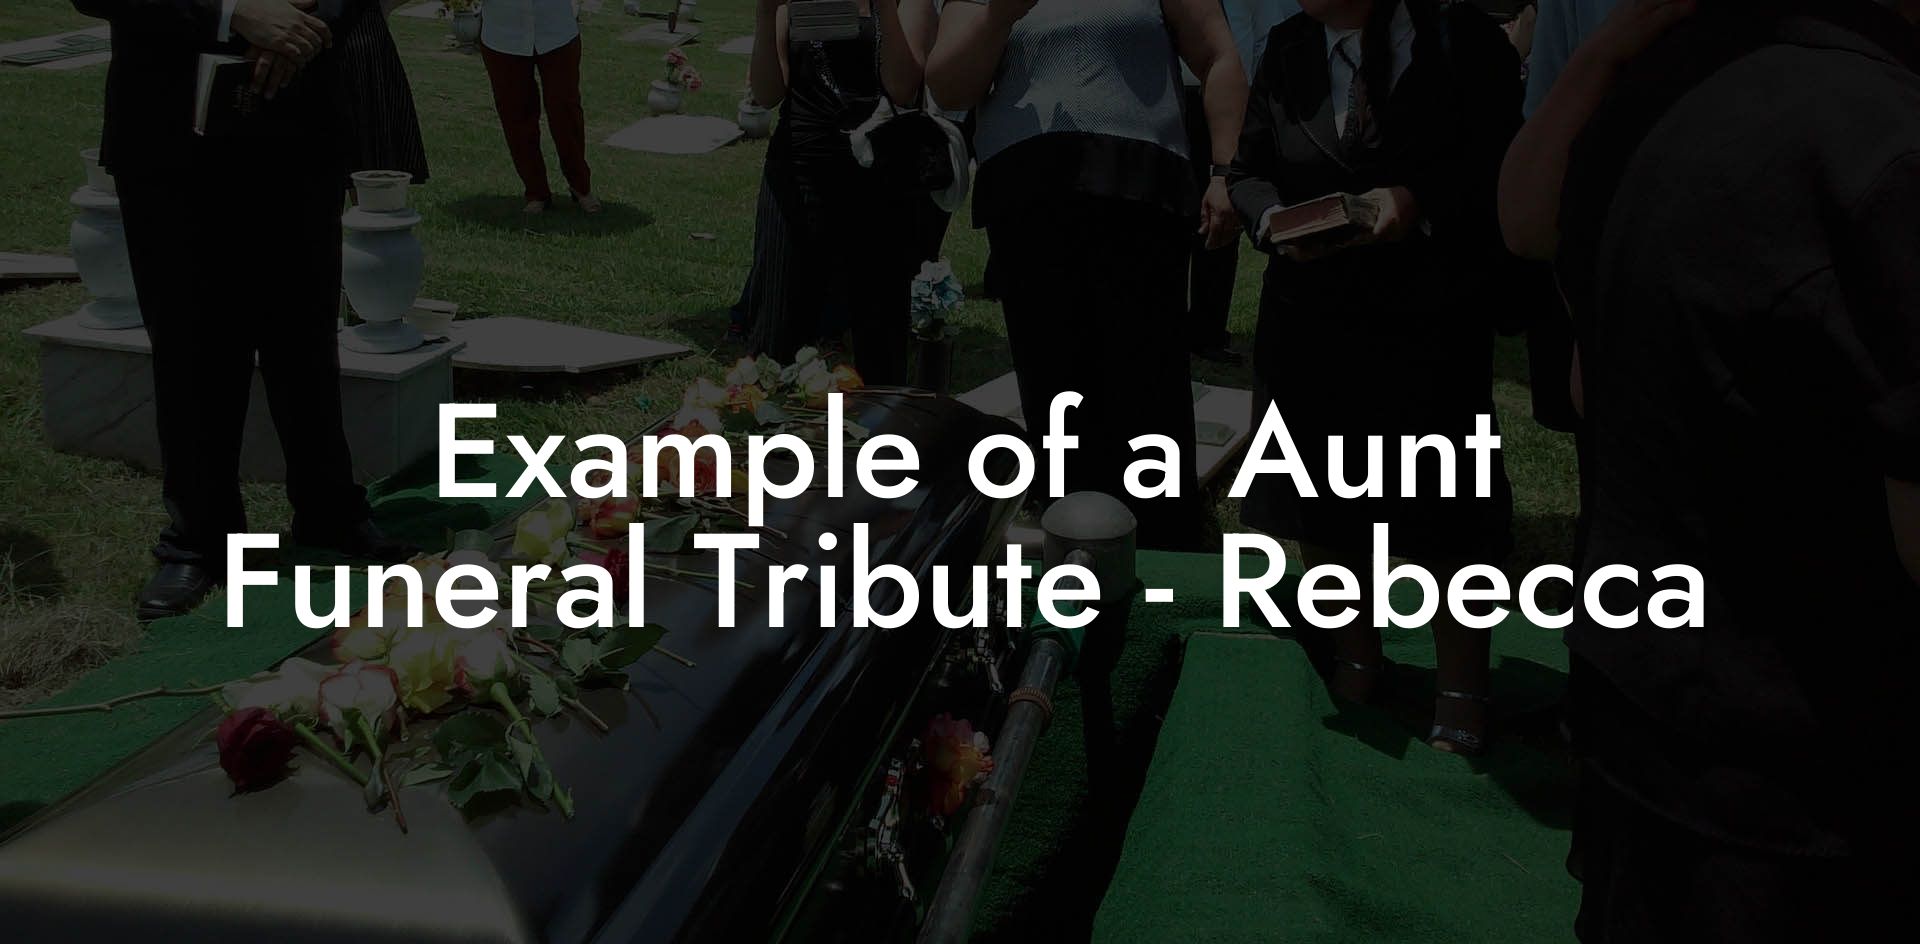 Example of a Aunt Funeral Tribute - Rebecca